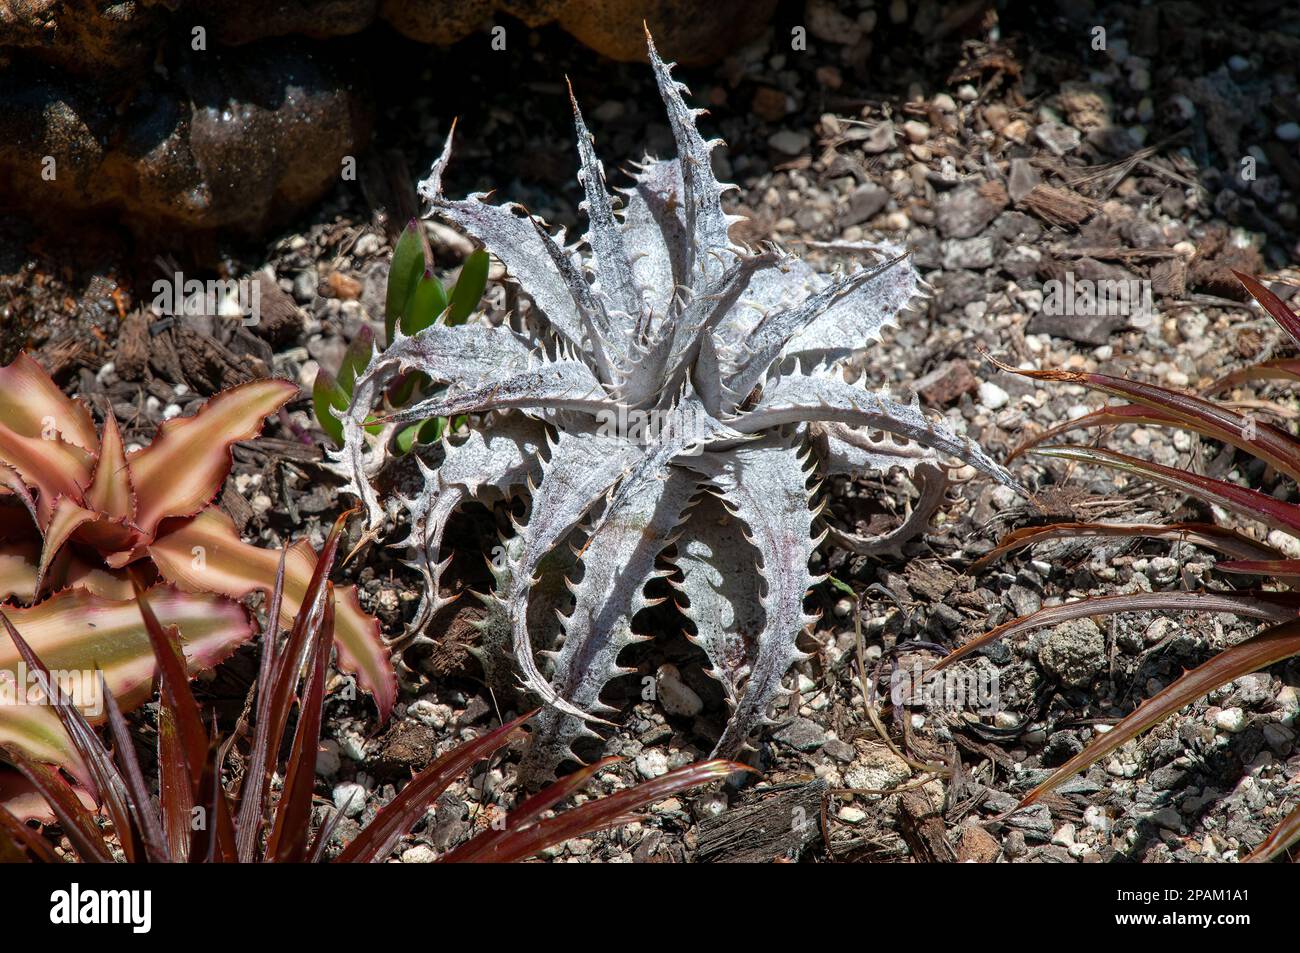 Sydney Australia, close-up of a silver dyckia have stiff and thorny leaves Stock Photo